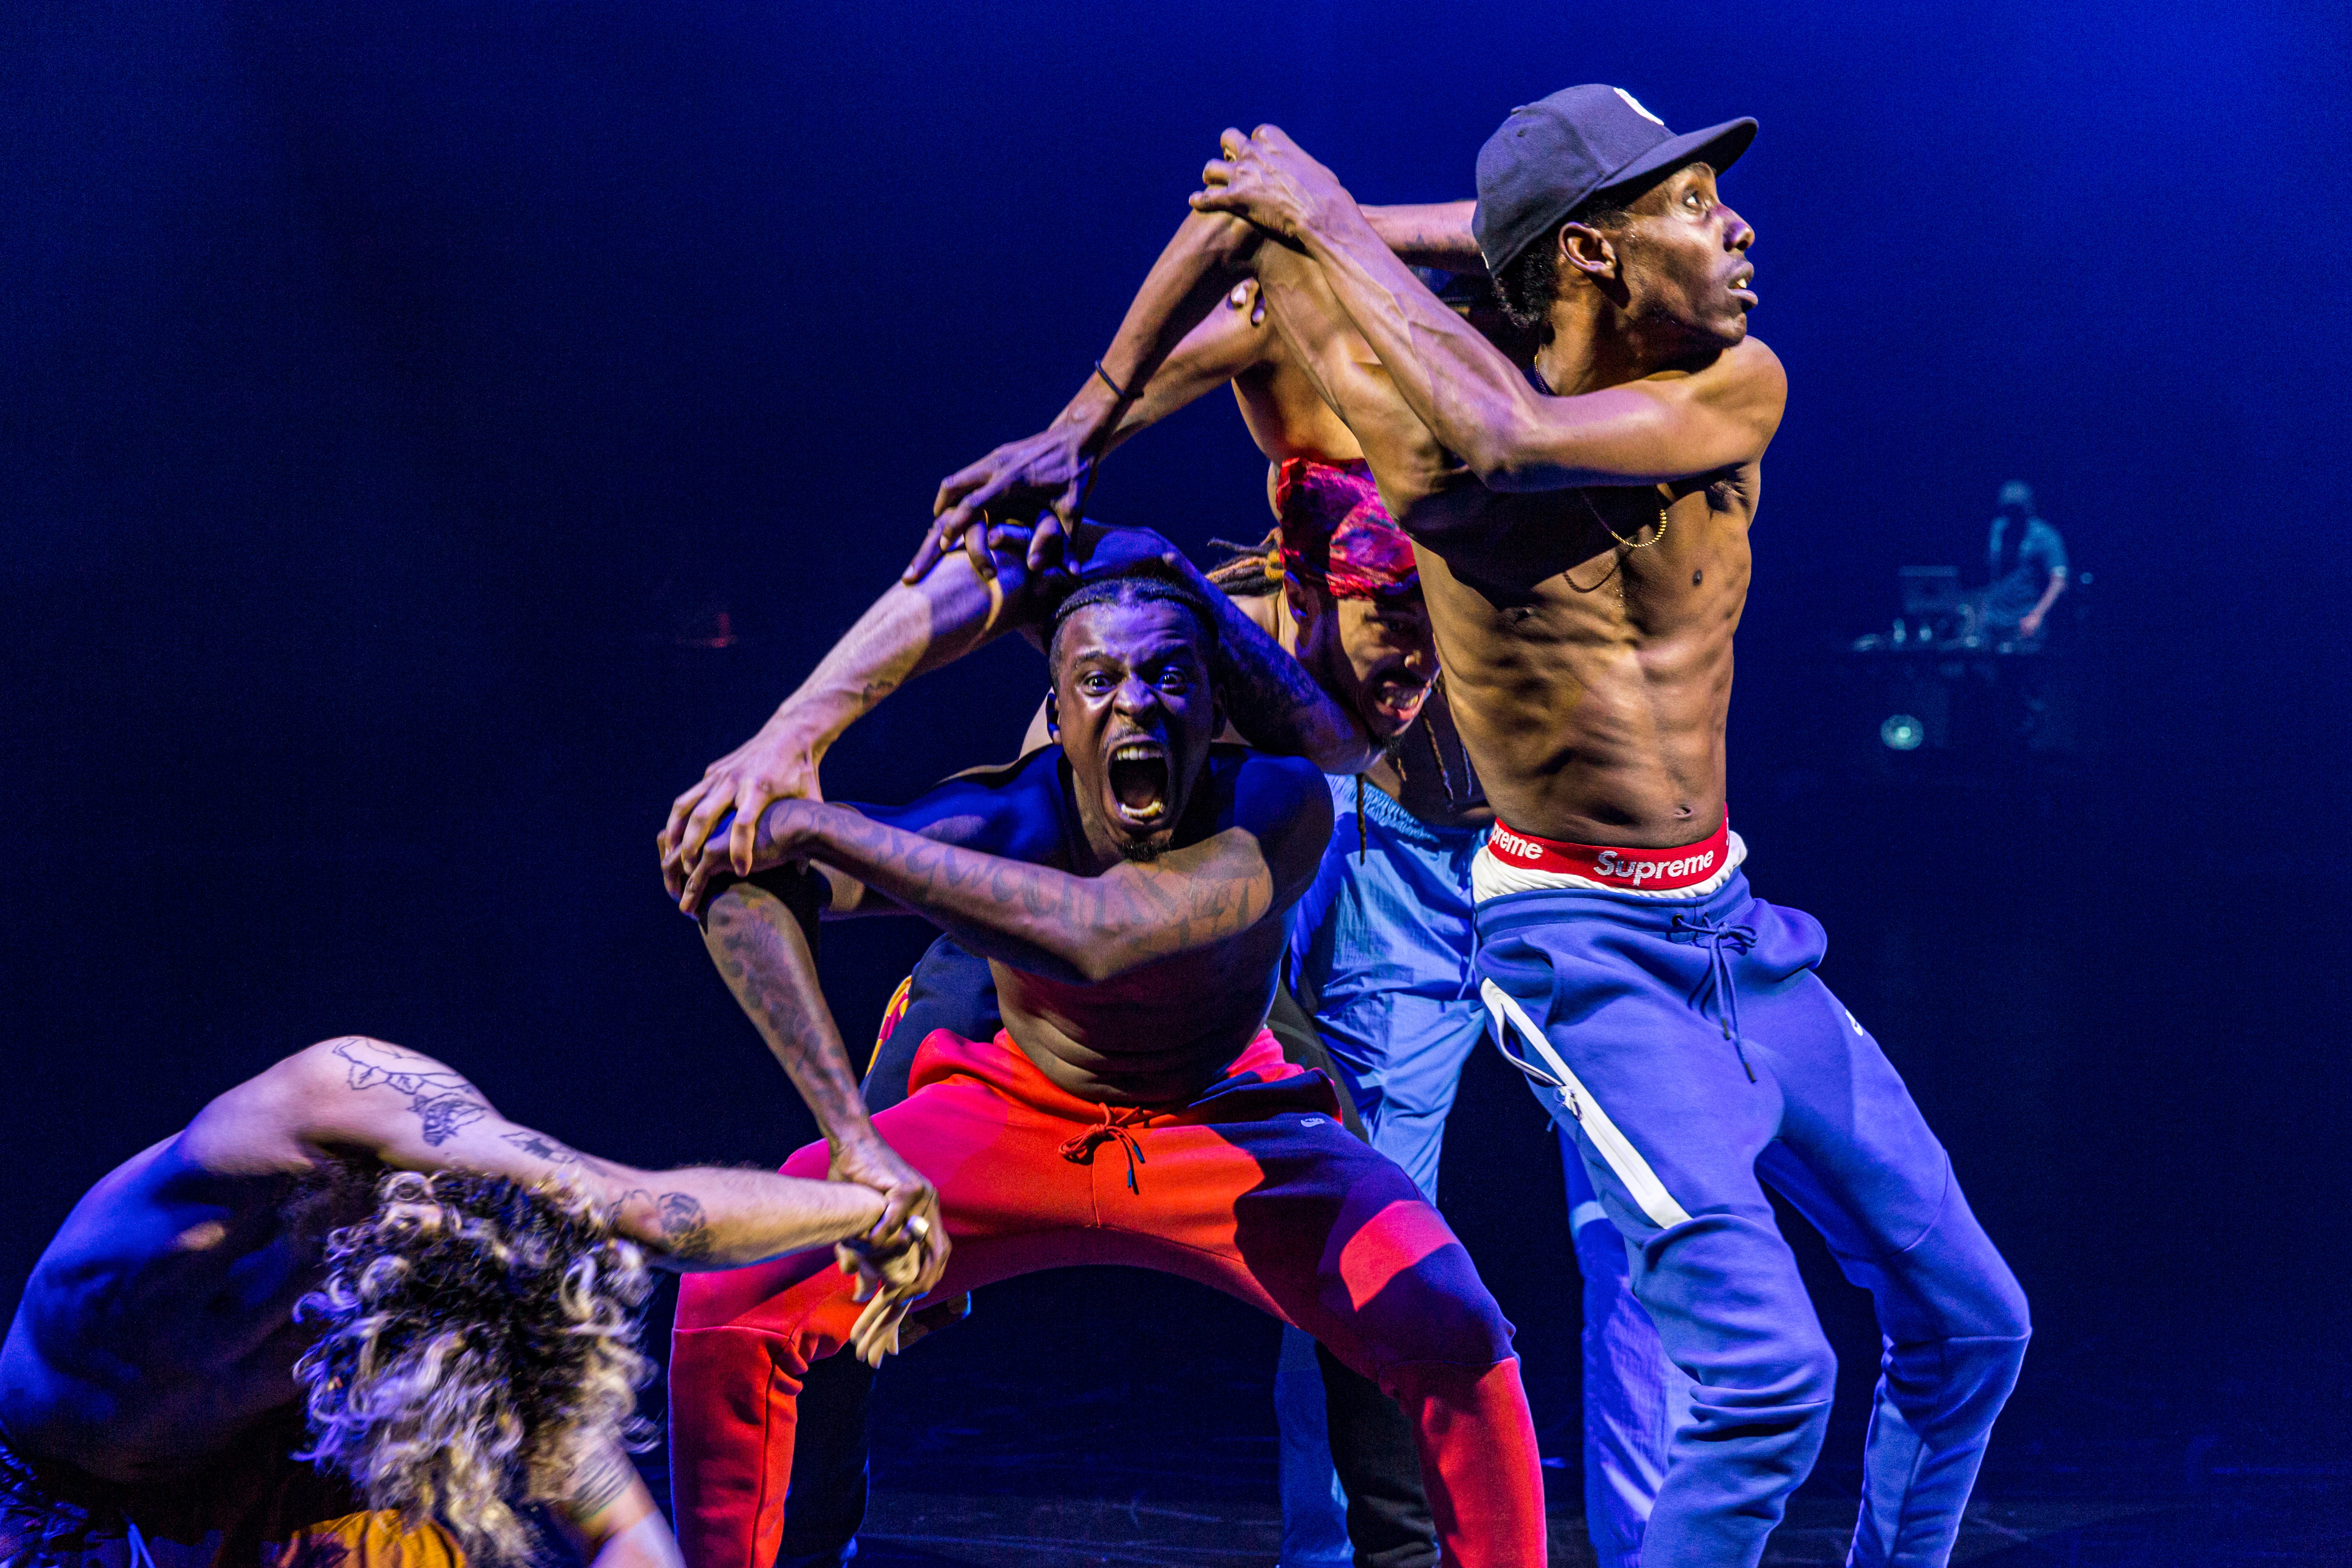 Street Dance Evolves From The Subway To Centerstage In The Powerful Performance 'Maze'